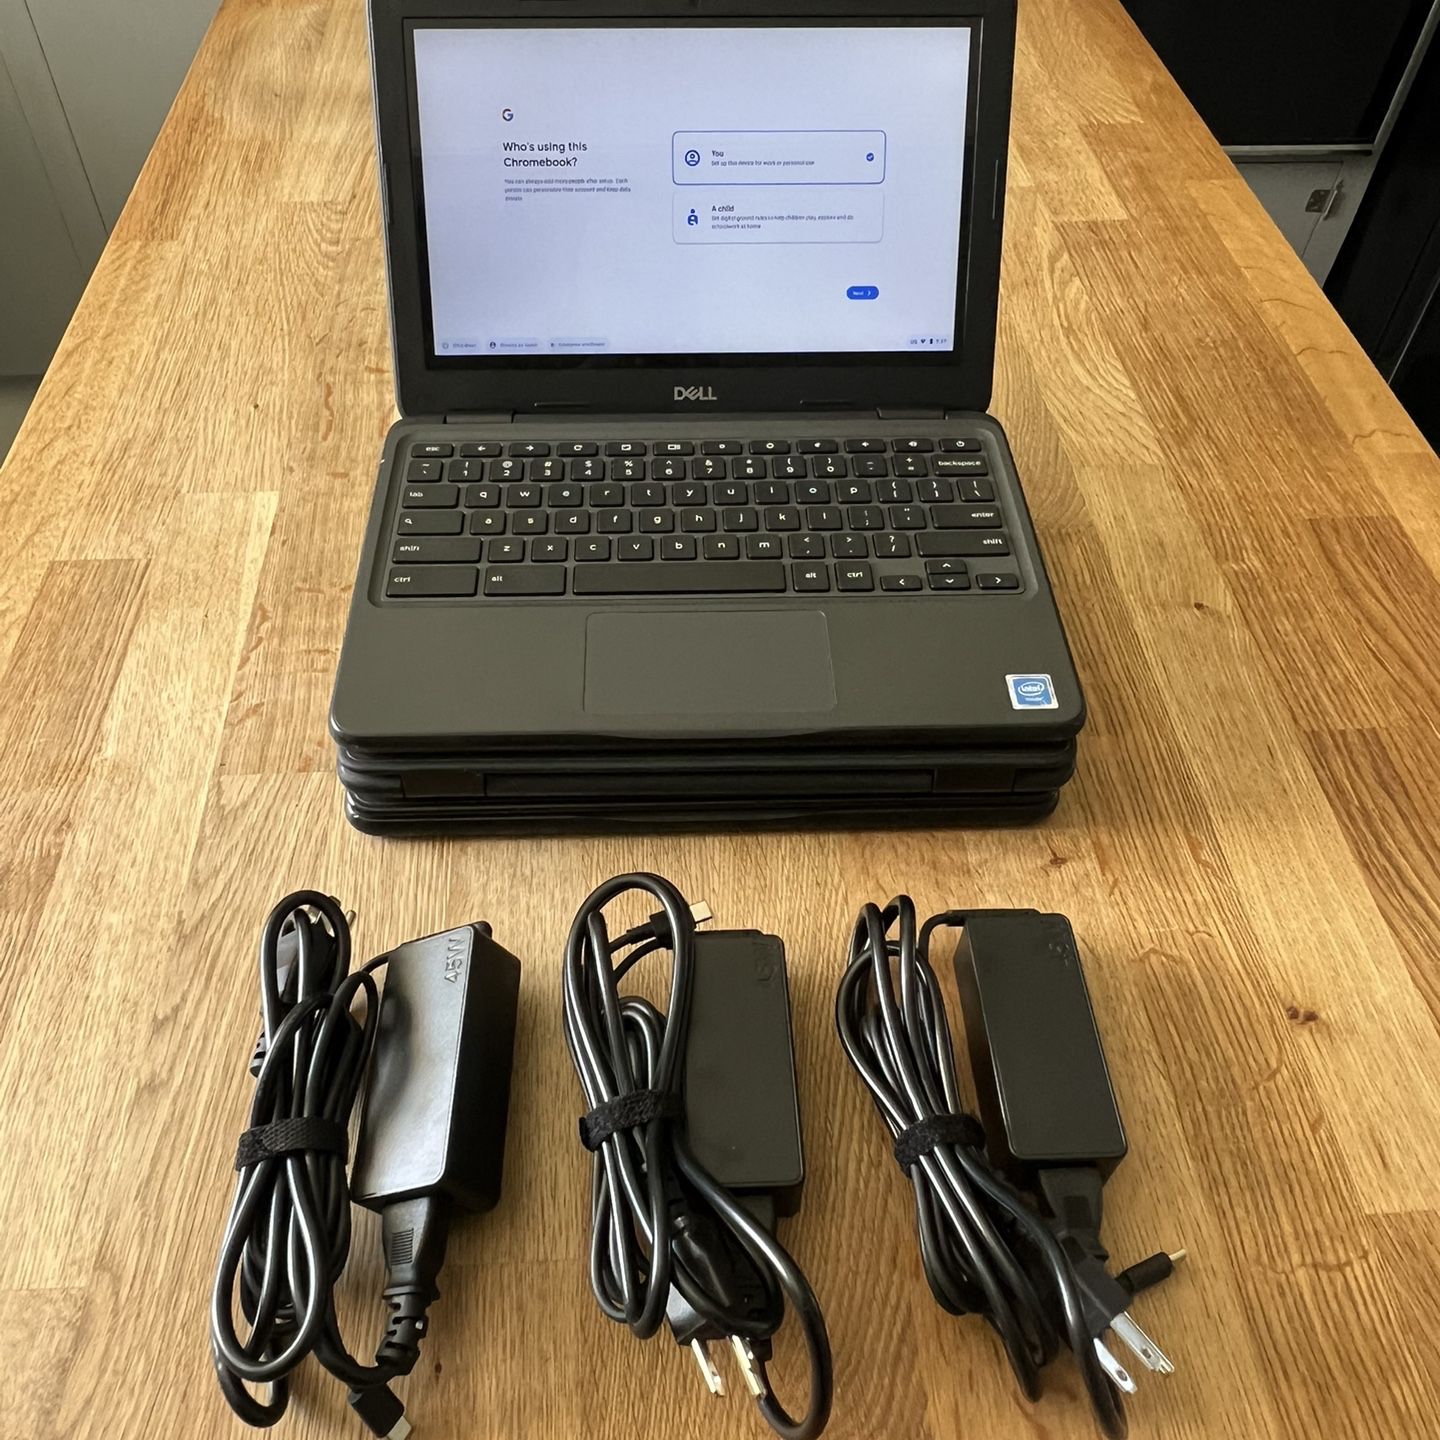 Dell Touchscreen ChromeBook 5190 Laptops - 3 Available / $30 Each